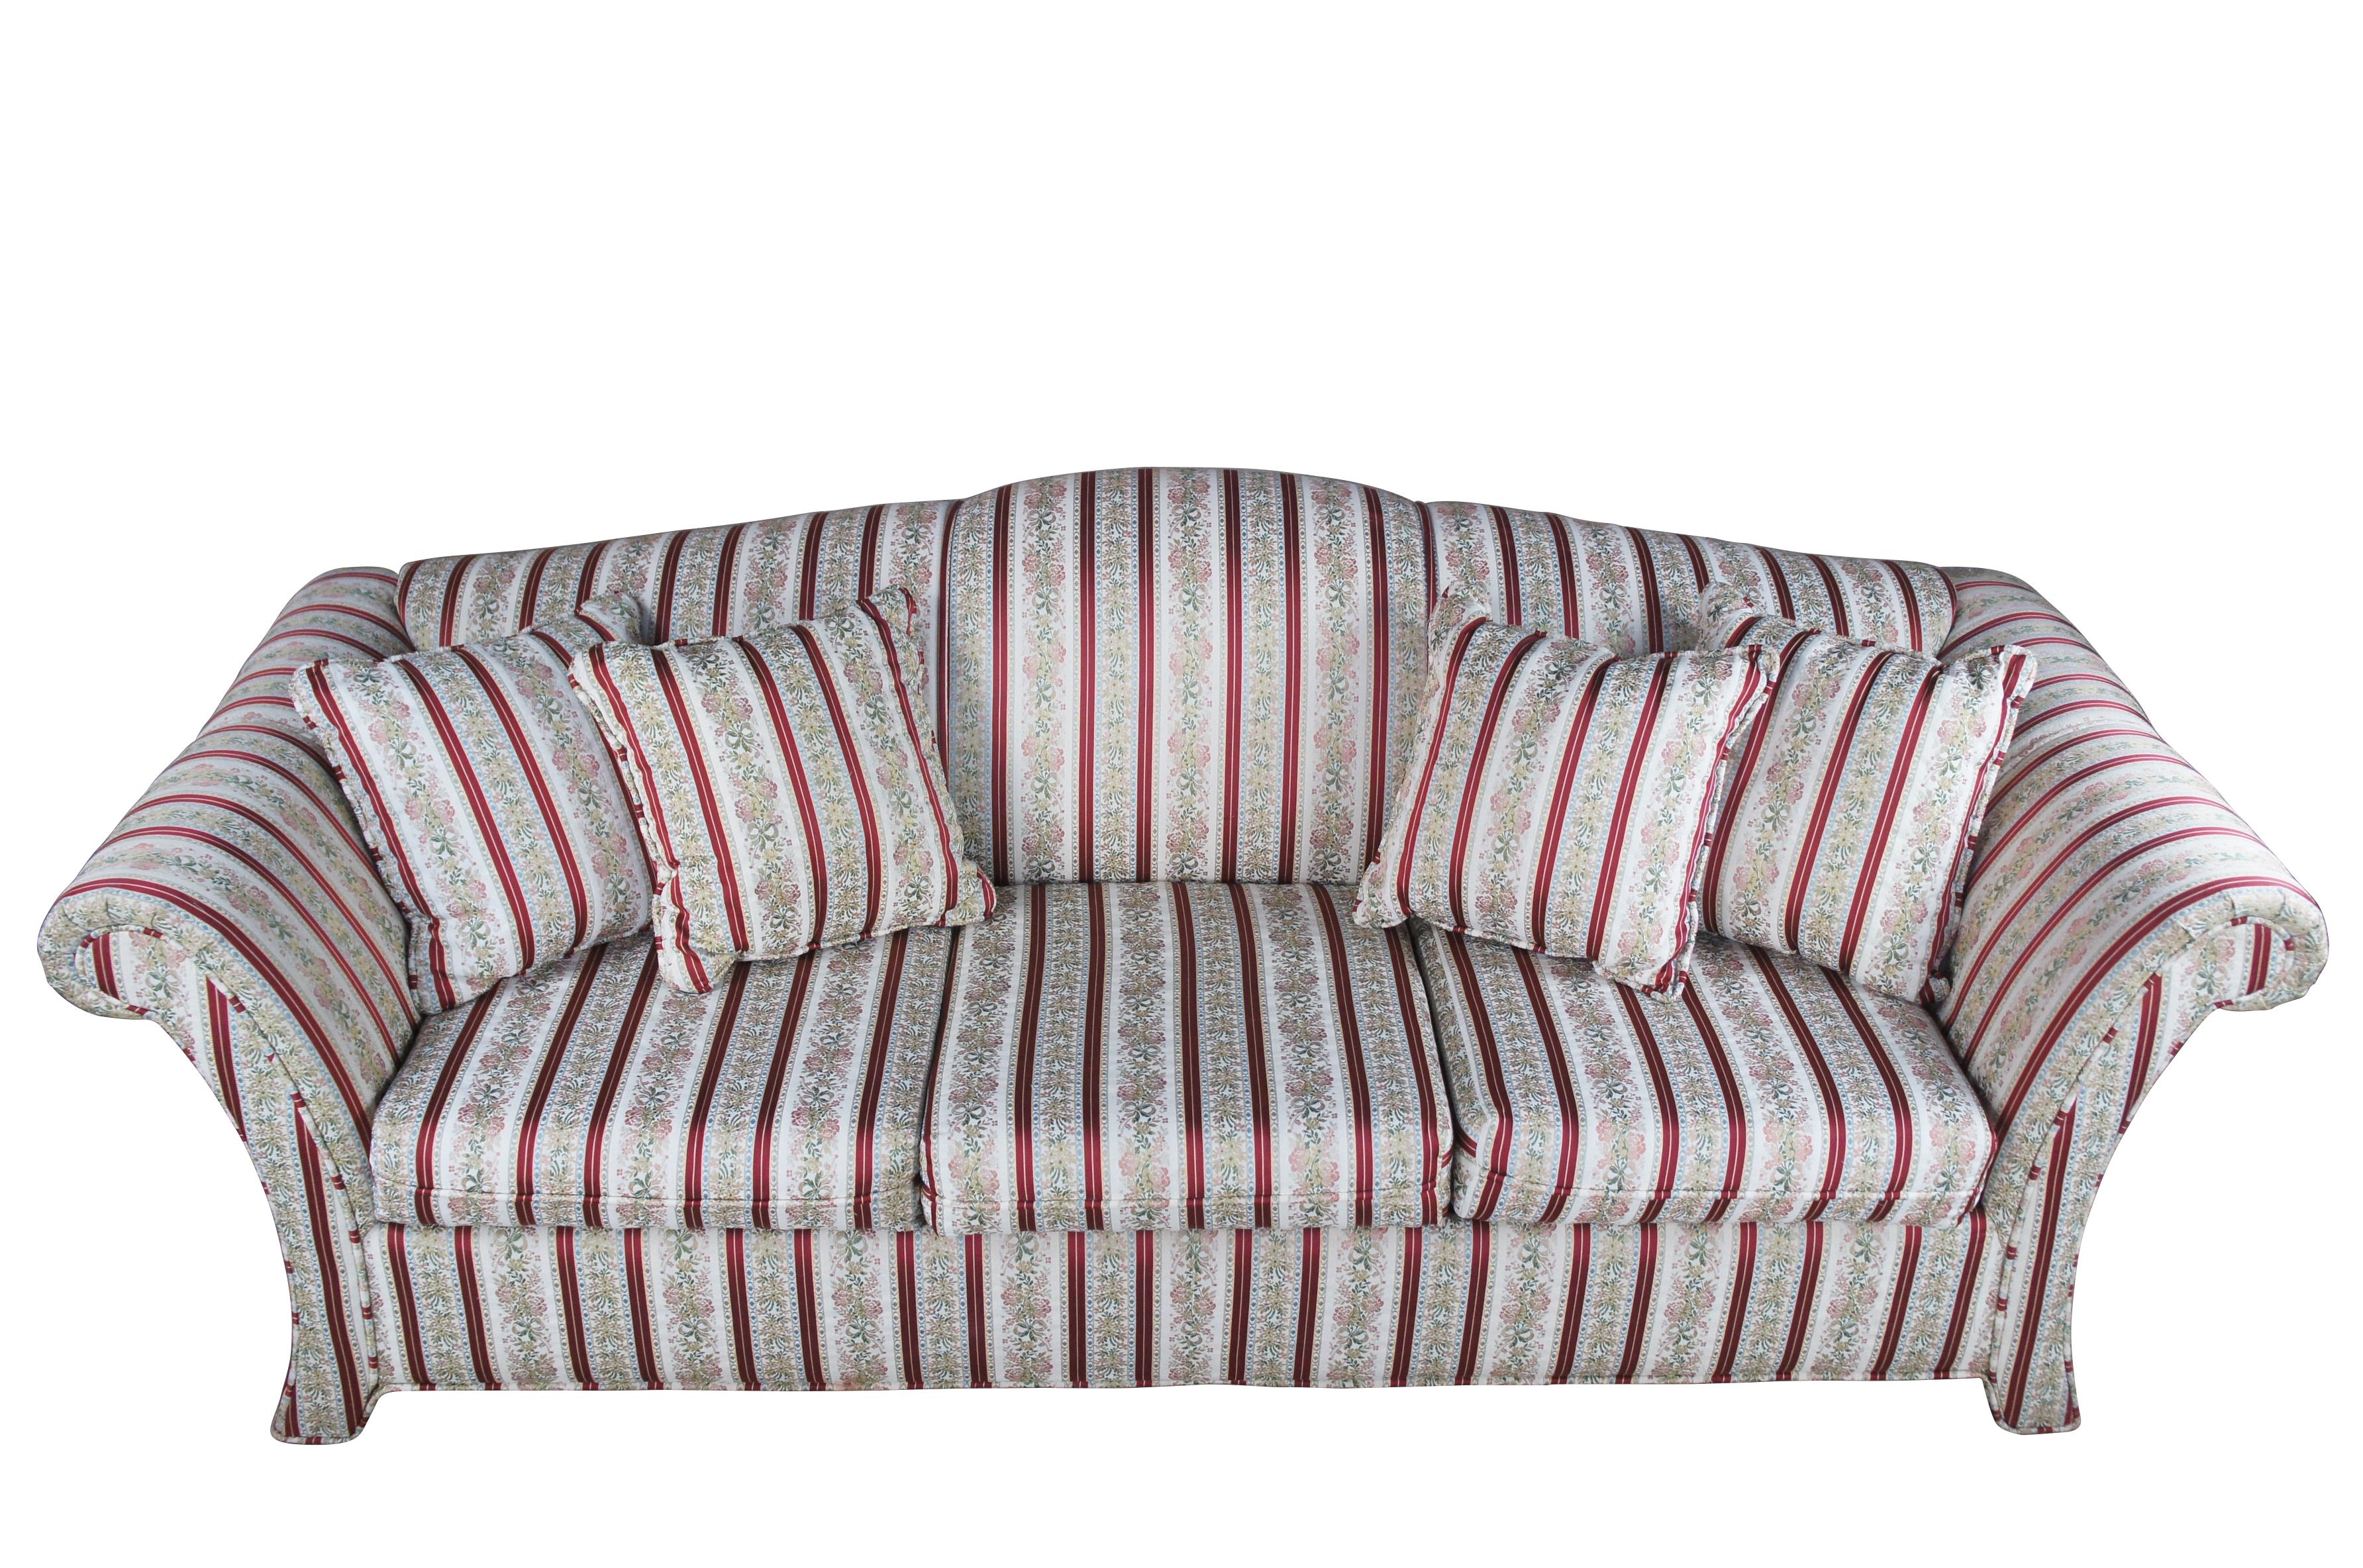 Vintage three seat sleeper sofa / pull out couch with queen size bed featuring Neoclassical styling with rolled arms, camelback and striped floral and ribbon design fabric. 

Dimensions:
33